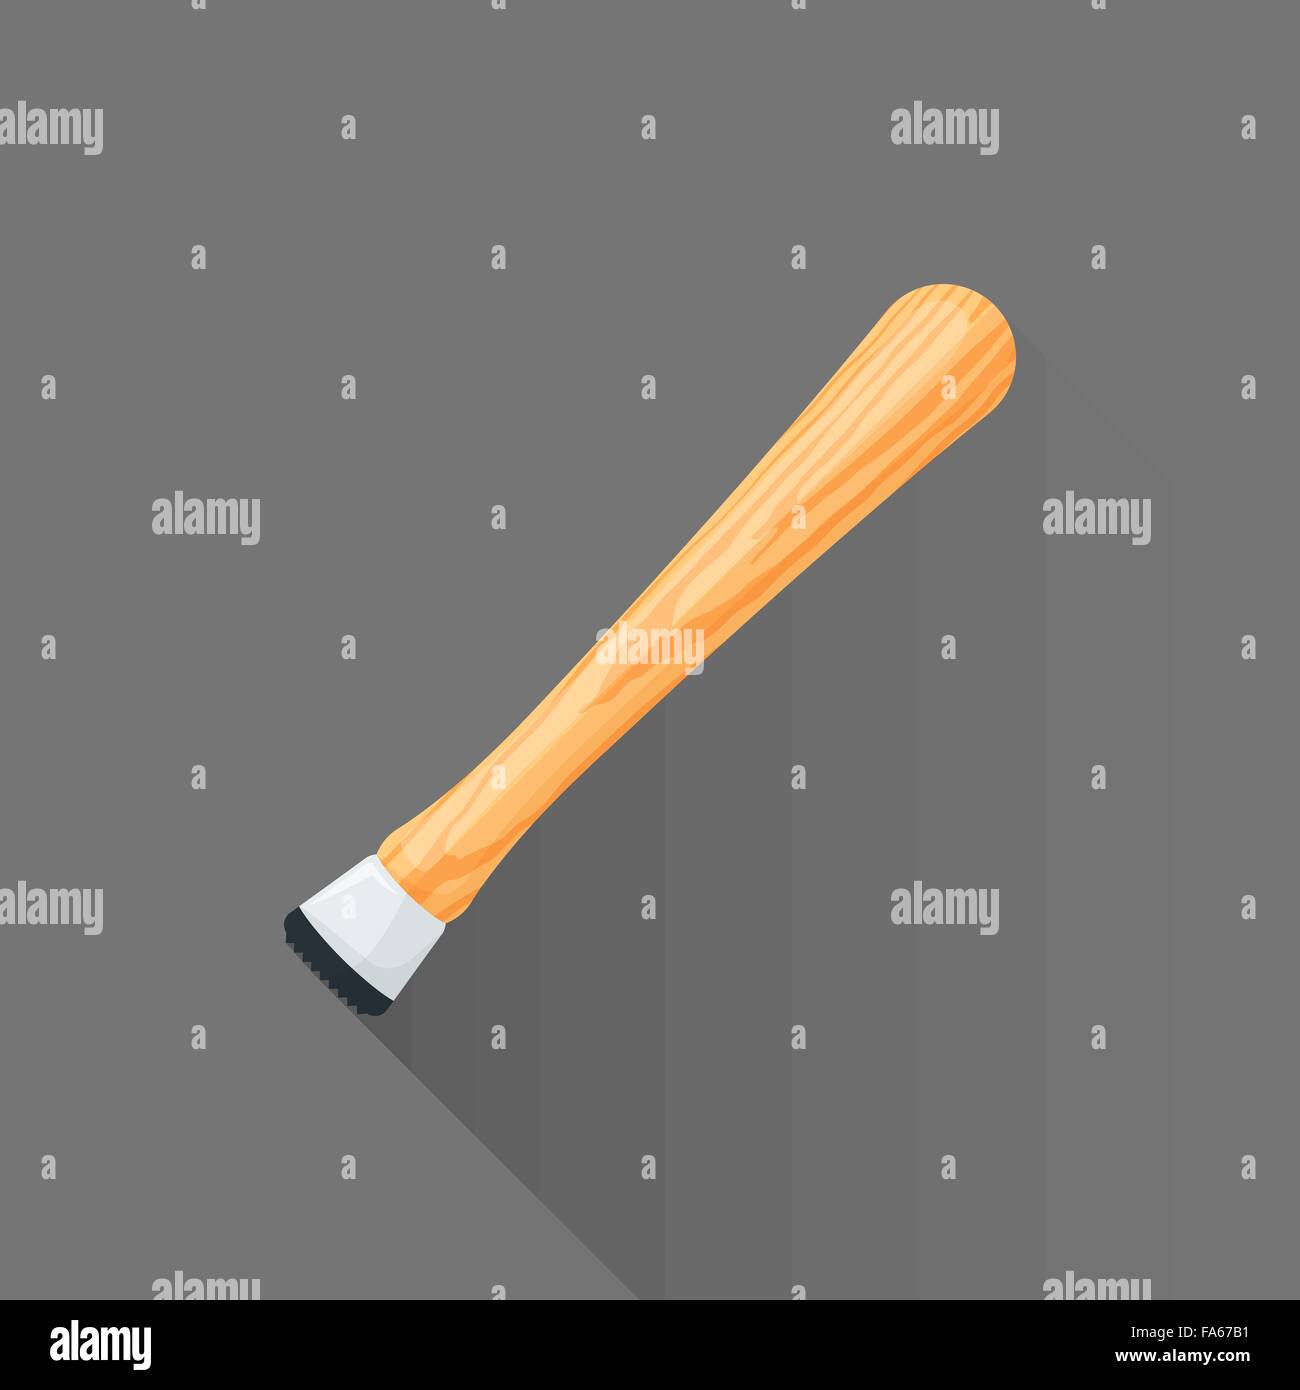 vector colored flat design bar stone muddler wood handle isolated illustration gray background long shadow Stock Vector